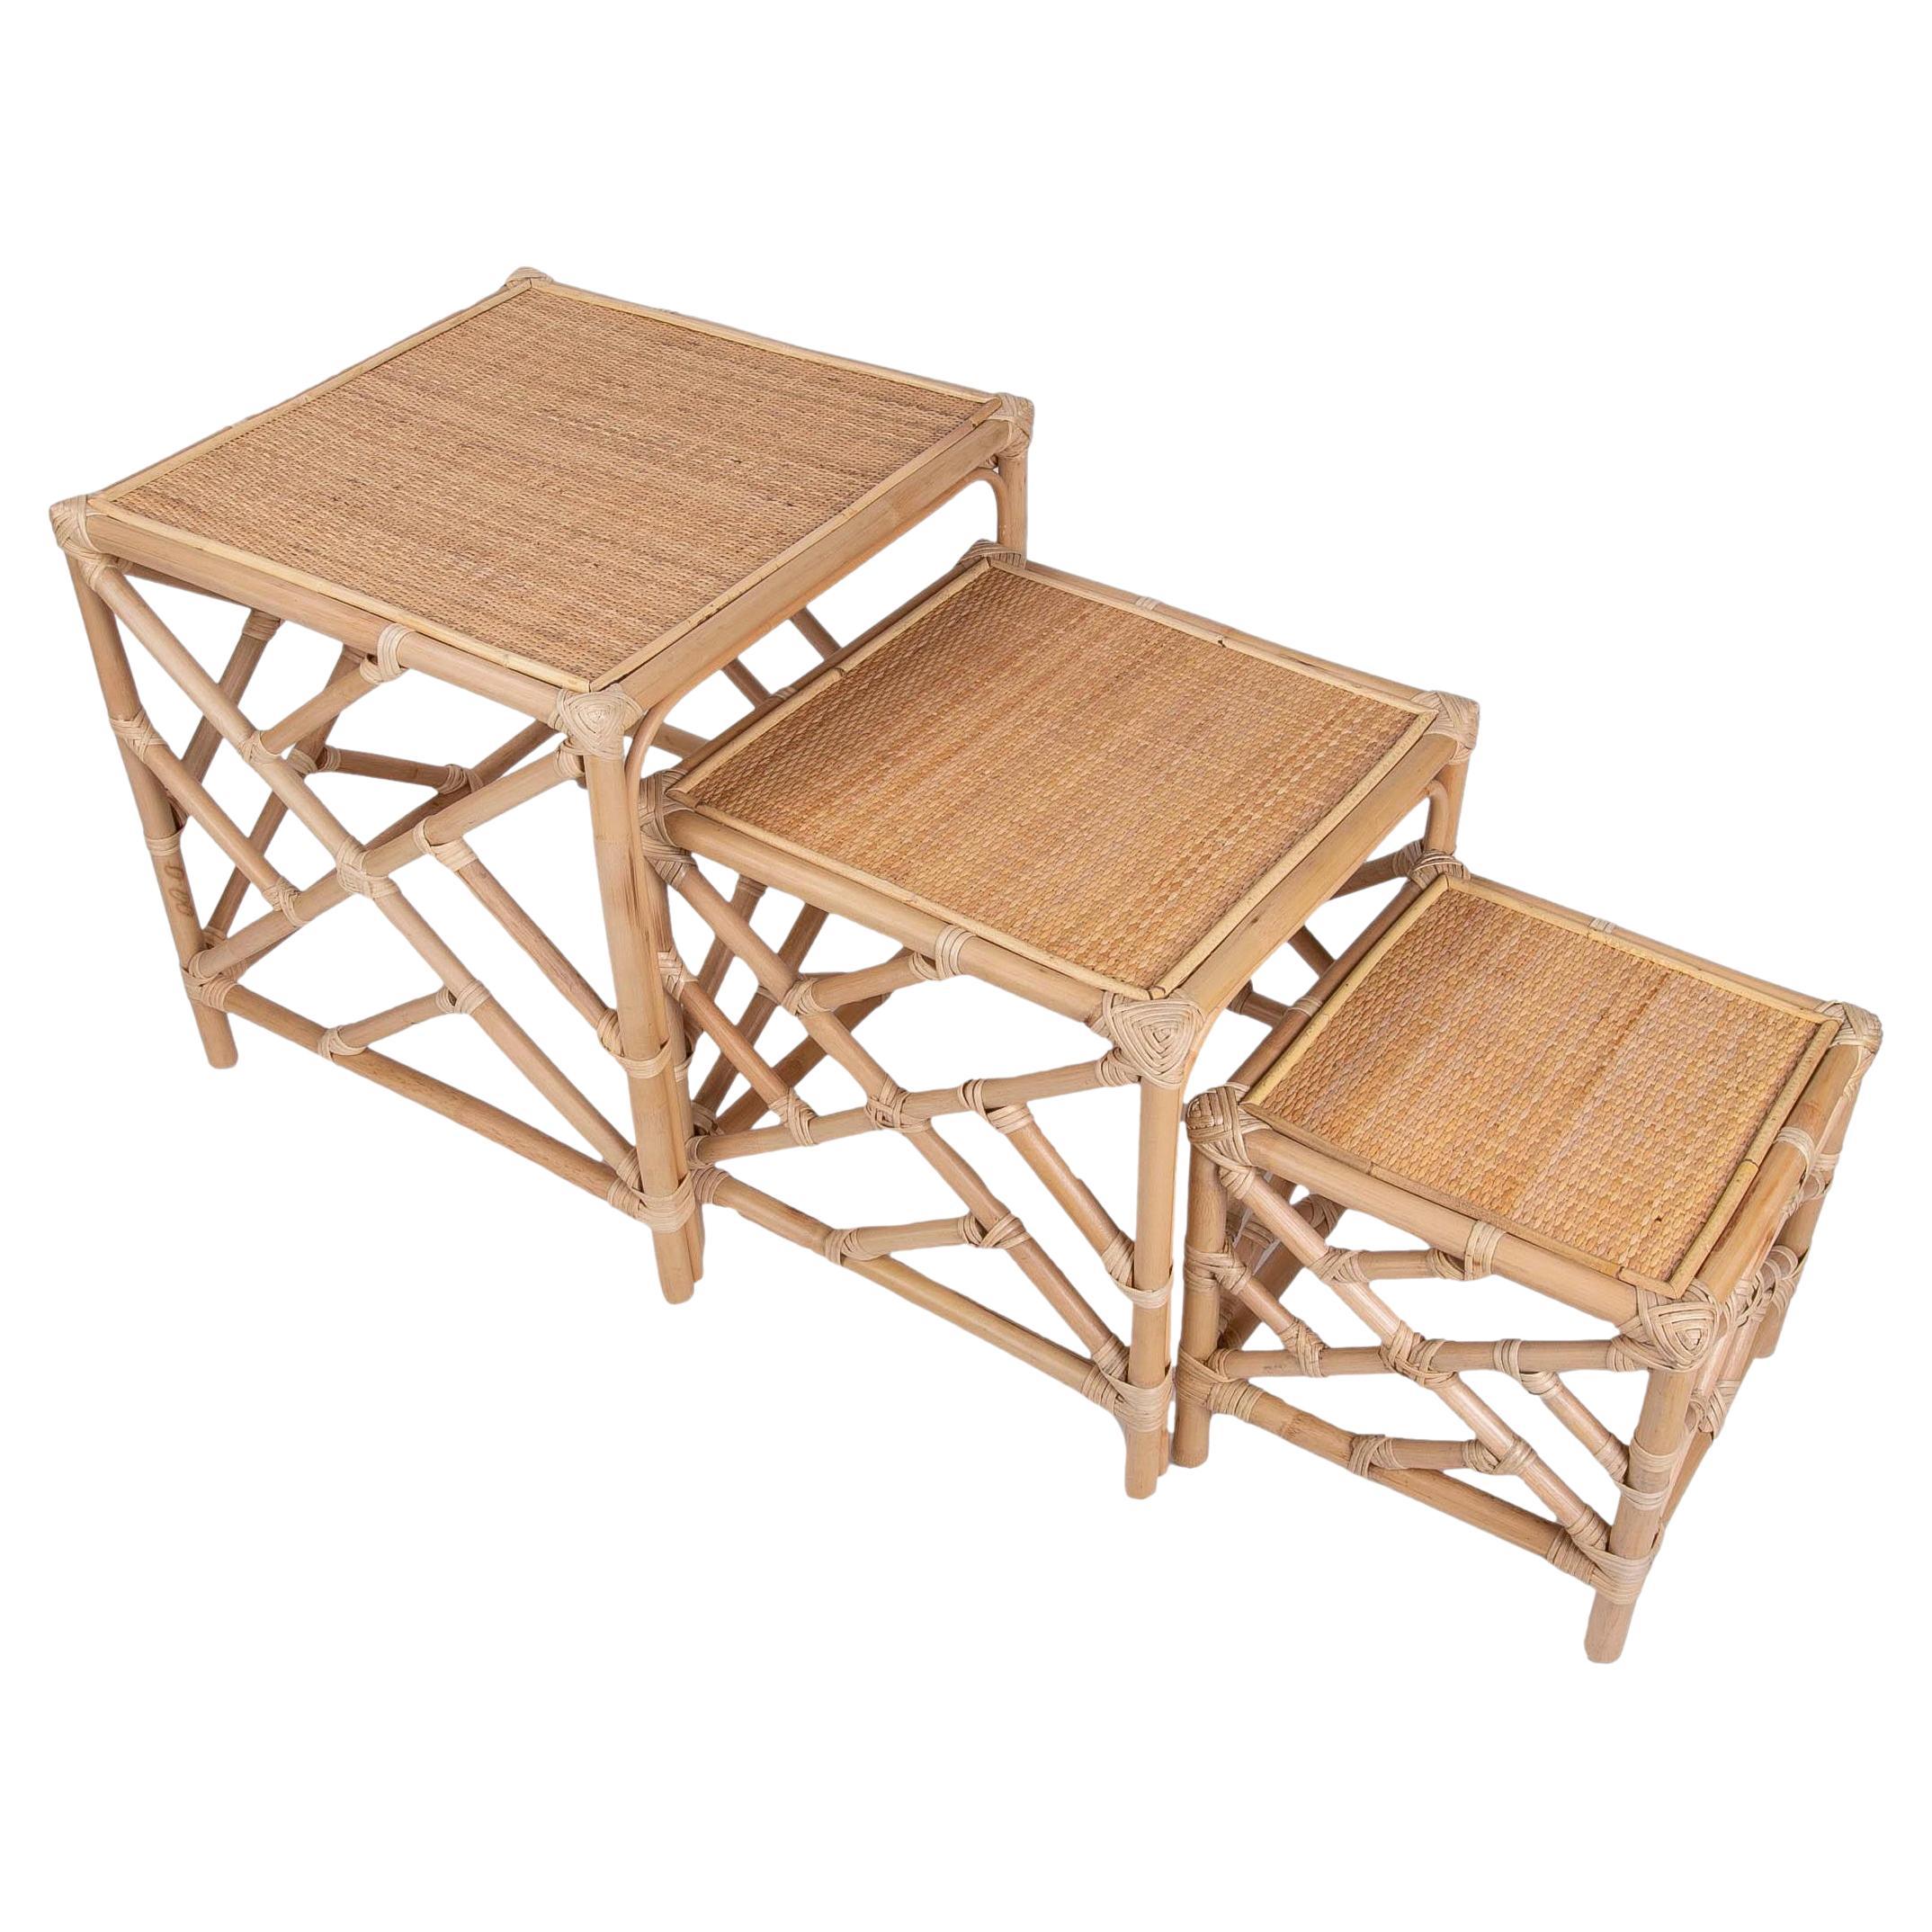 Bamboo and wicker Nesting Table Consisting of Three Tables in Different Sizes For Sale